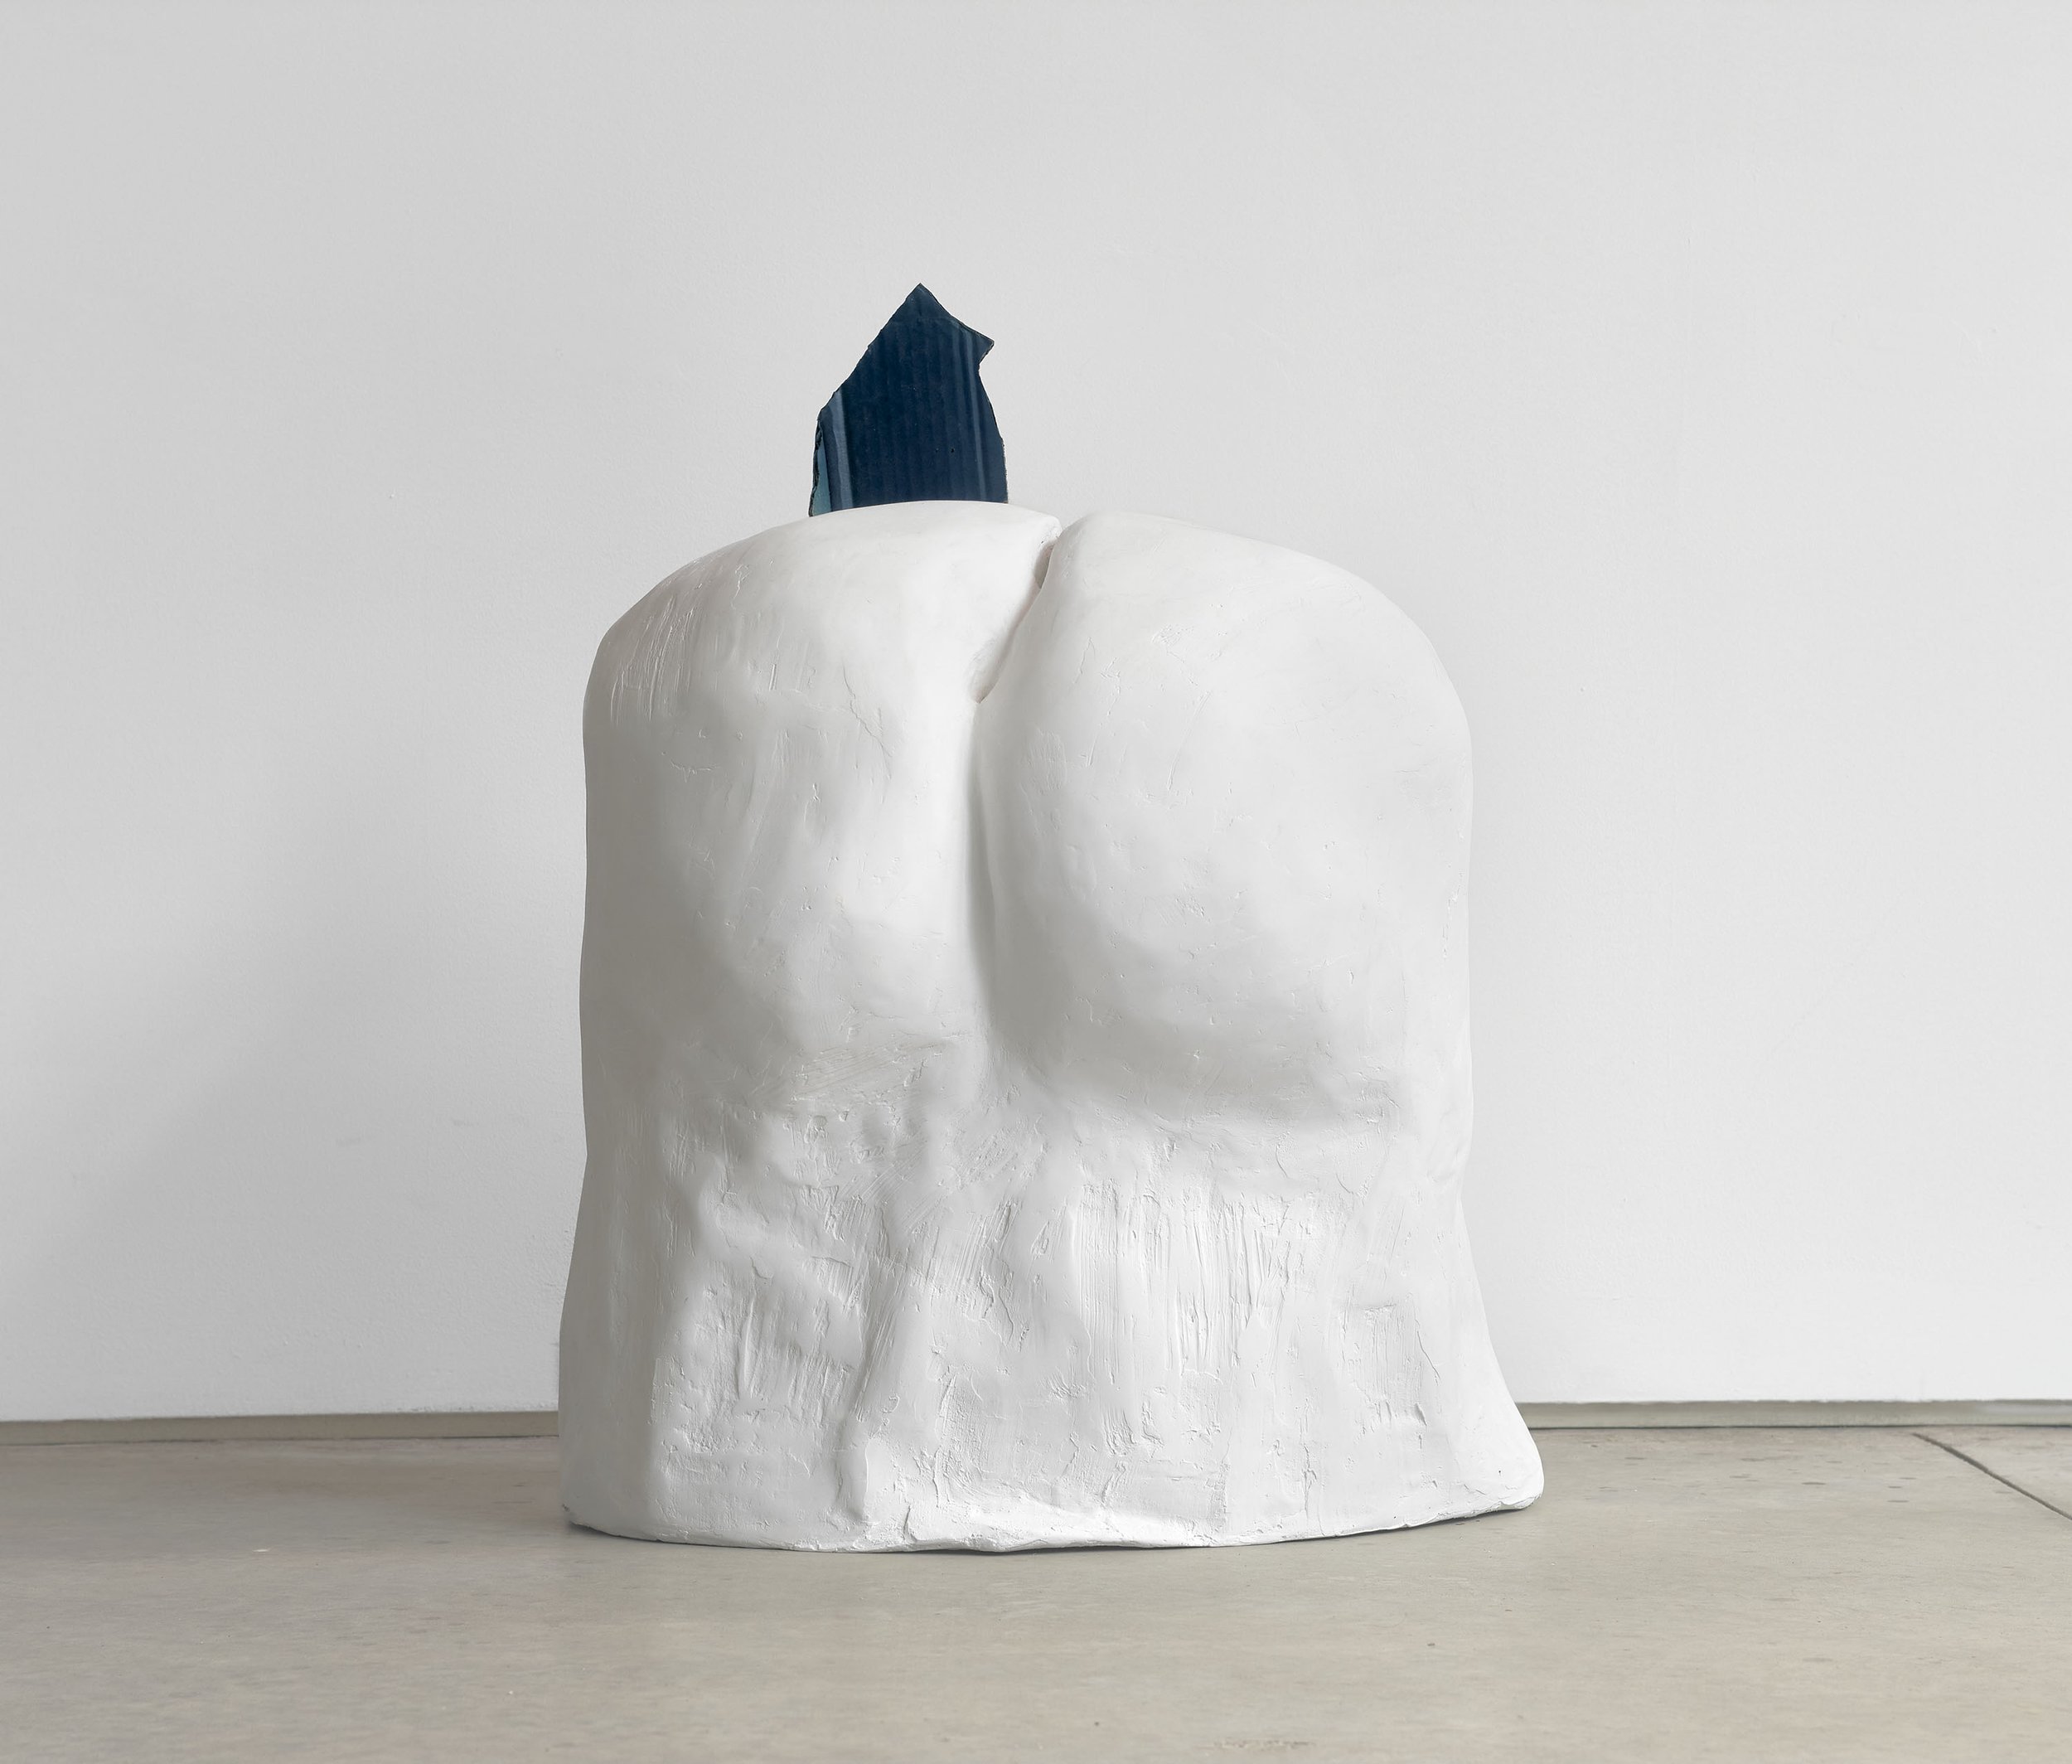 Sofia Quirno, Bottoms Up, 2022, Paper, cardboard, glue, modeling paste, 29 x 13 x 18 in.jpg